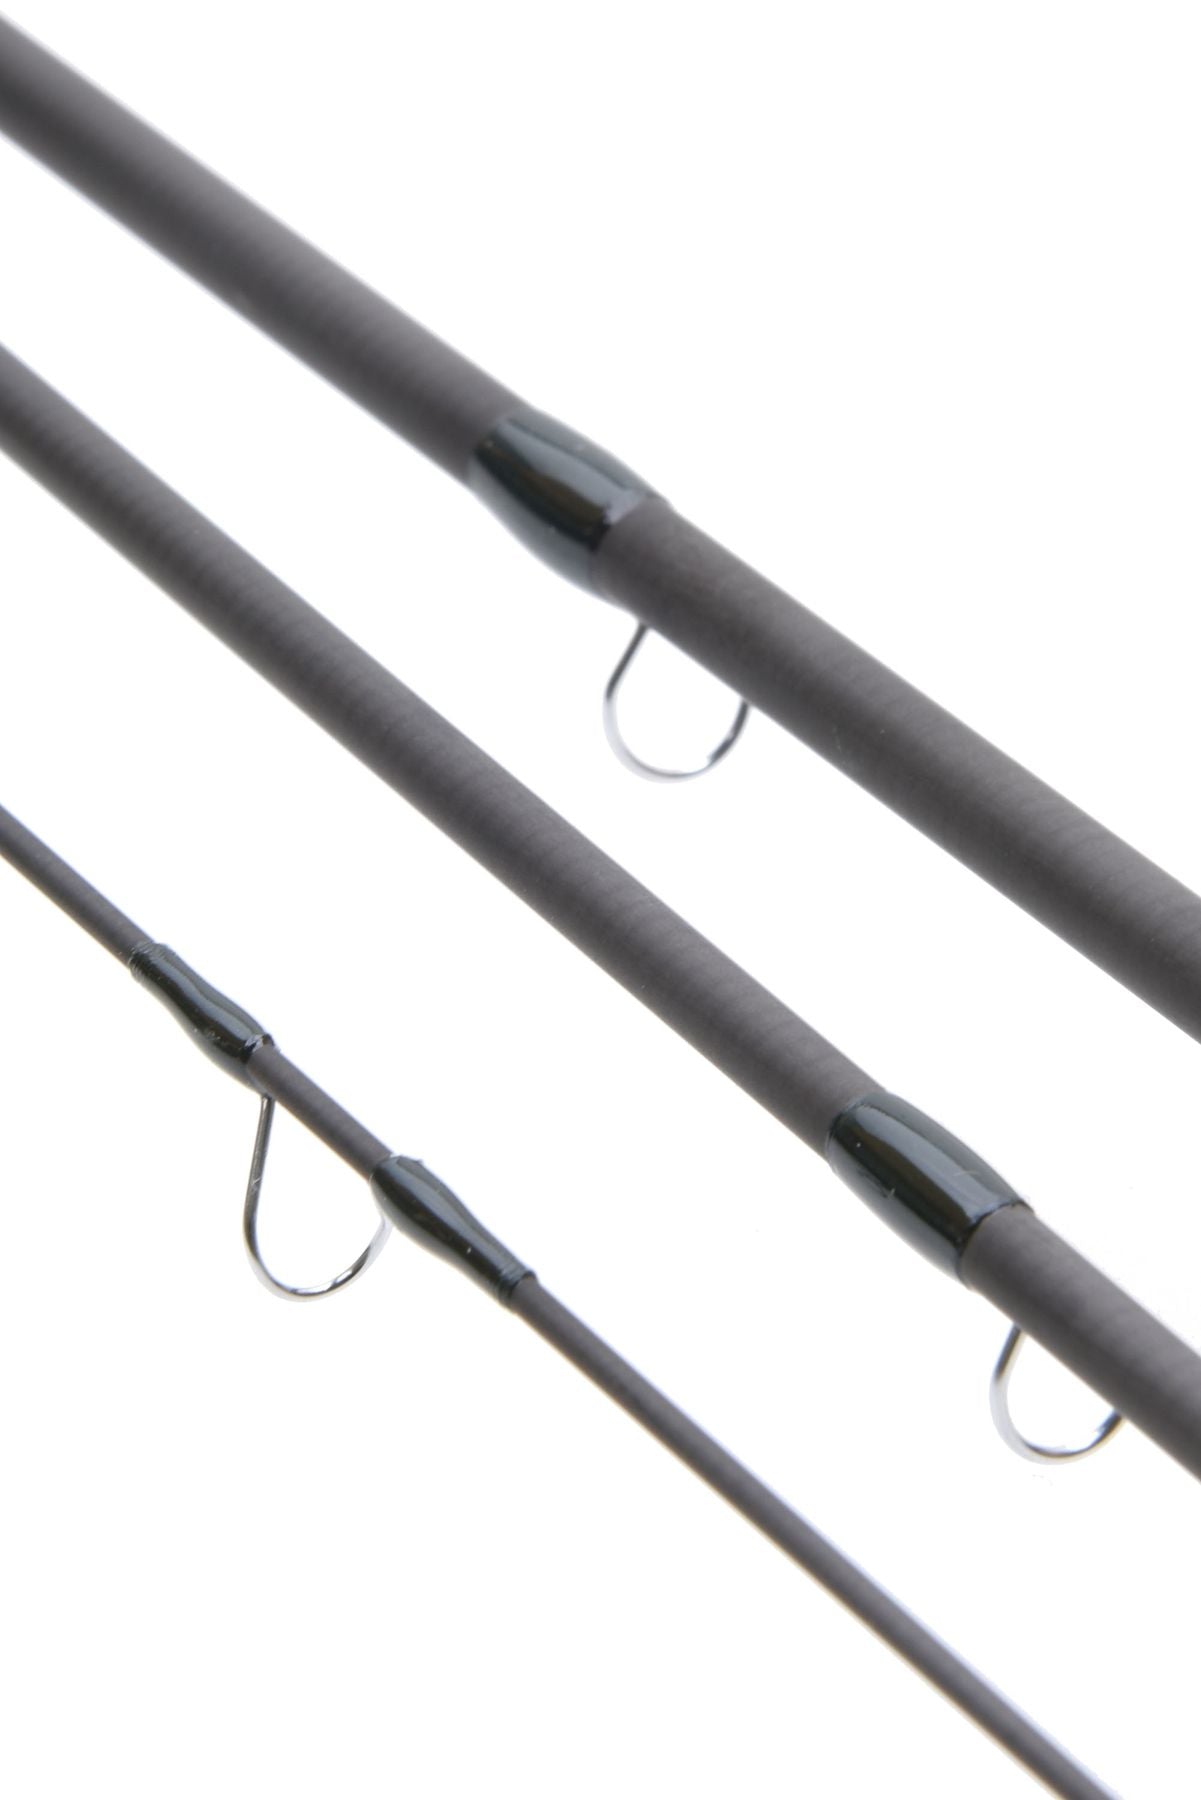 VISION NYMPHMANIAC FLY RODS  - SAVE £100 OFF RRP!